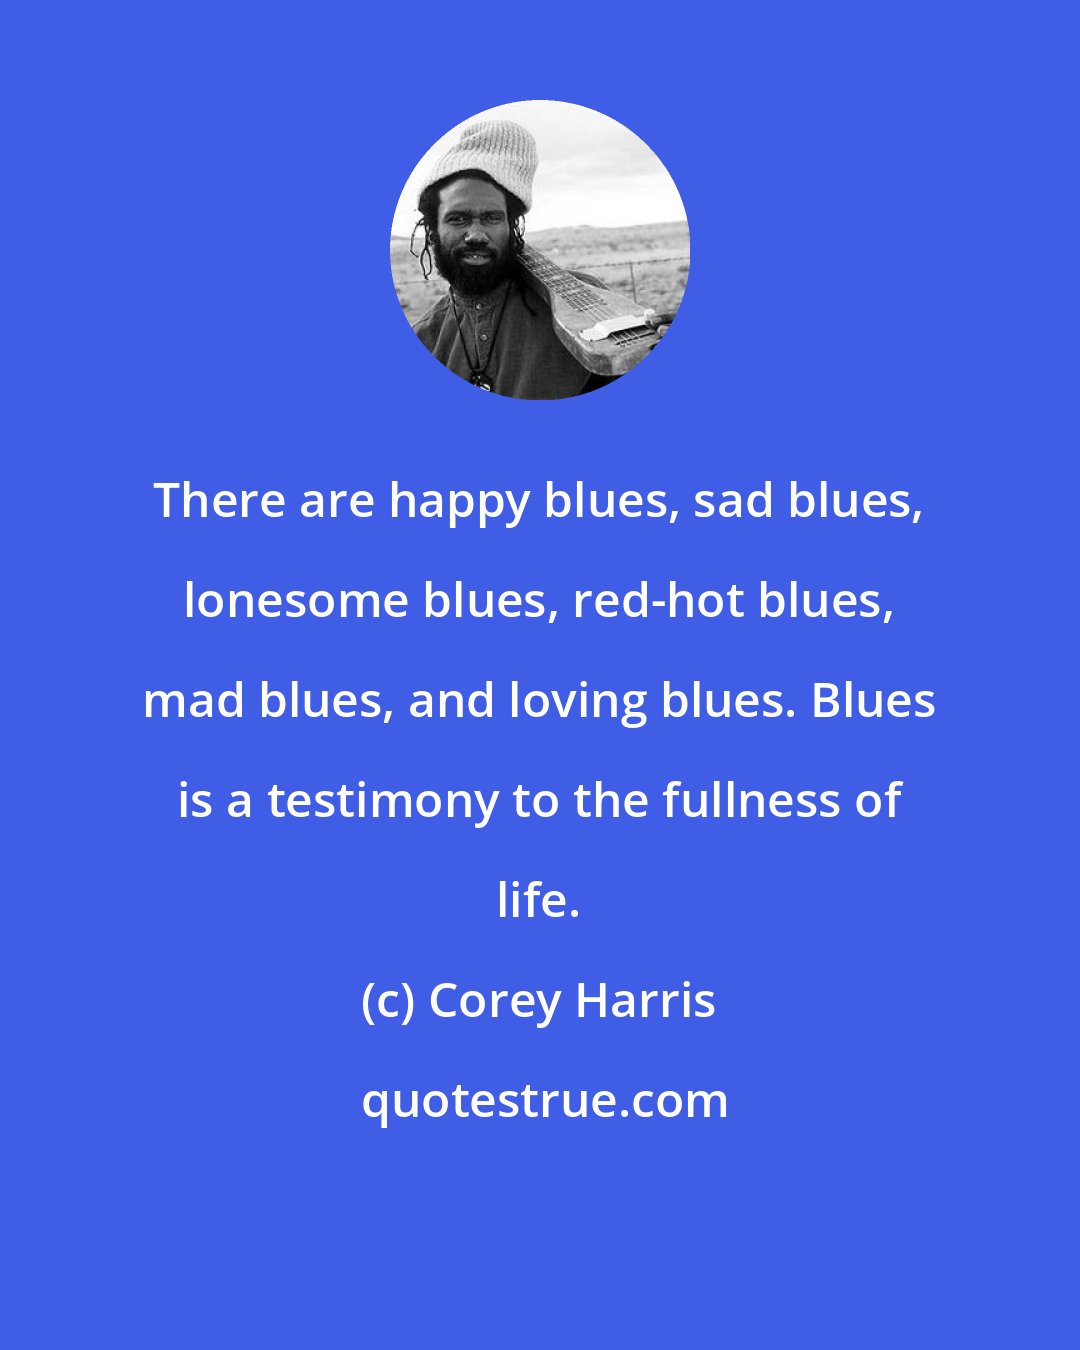 Corey Harris: There are happy blues, sad blues, lonesome blues, red-hot blues, mad blues, and loving blues. Blues is a testimony to the fullness of life.